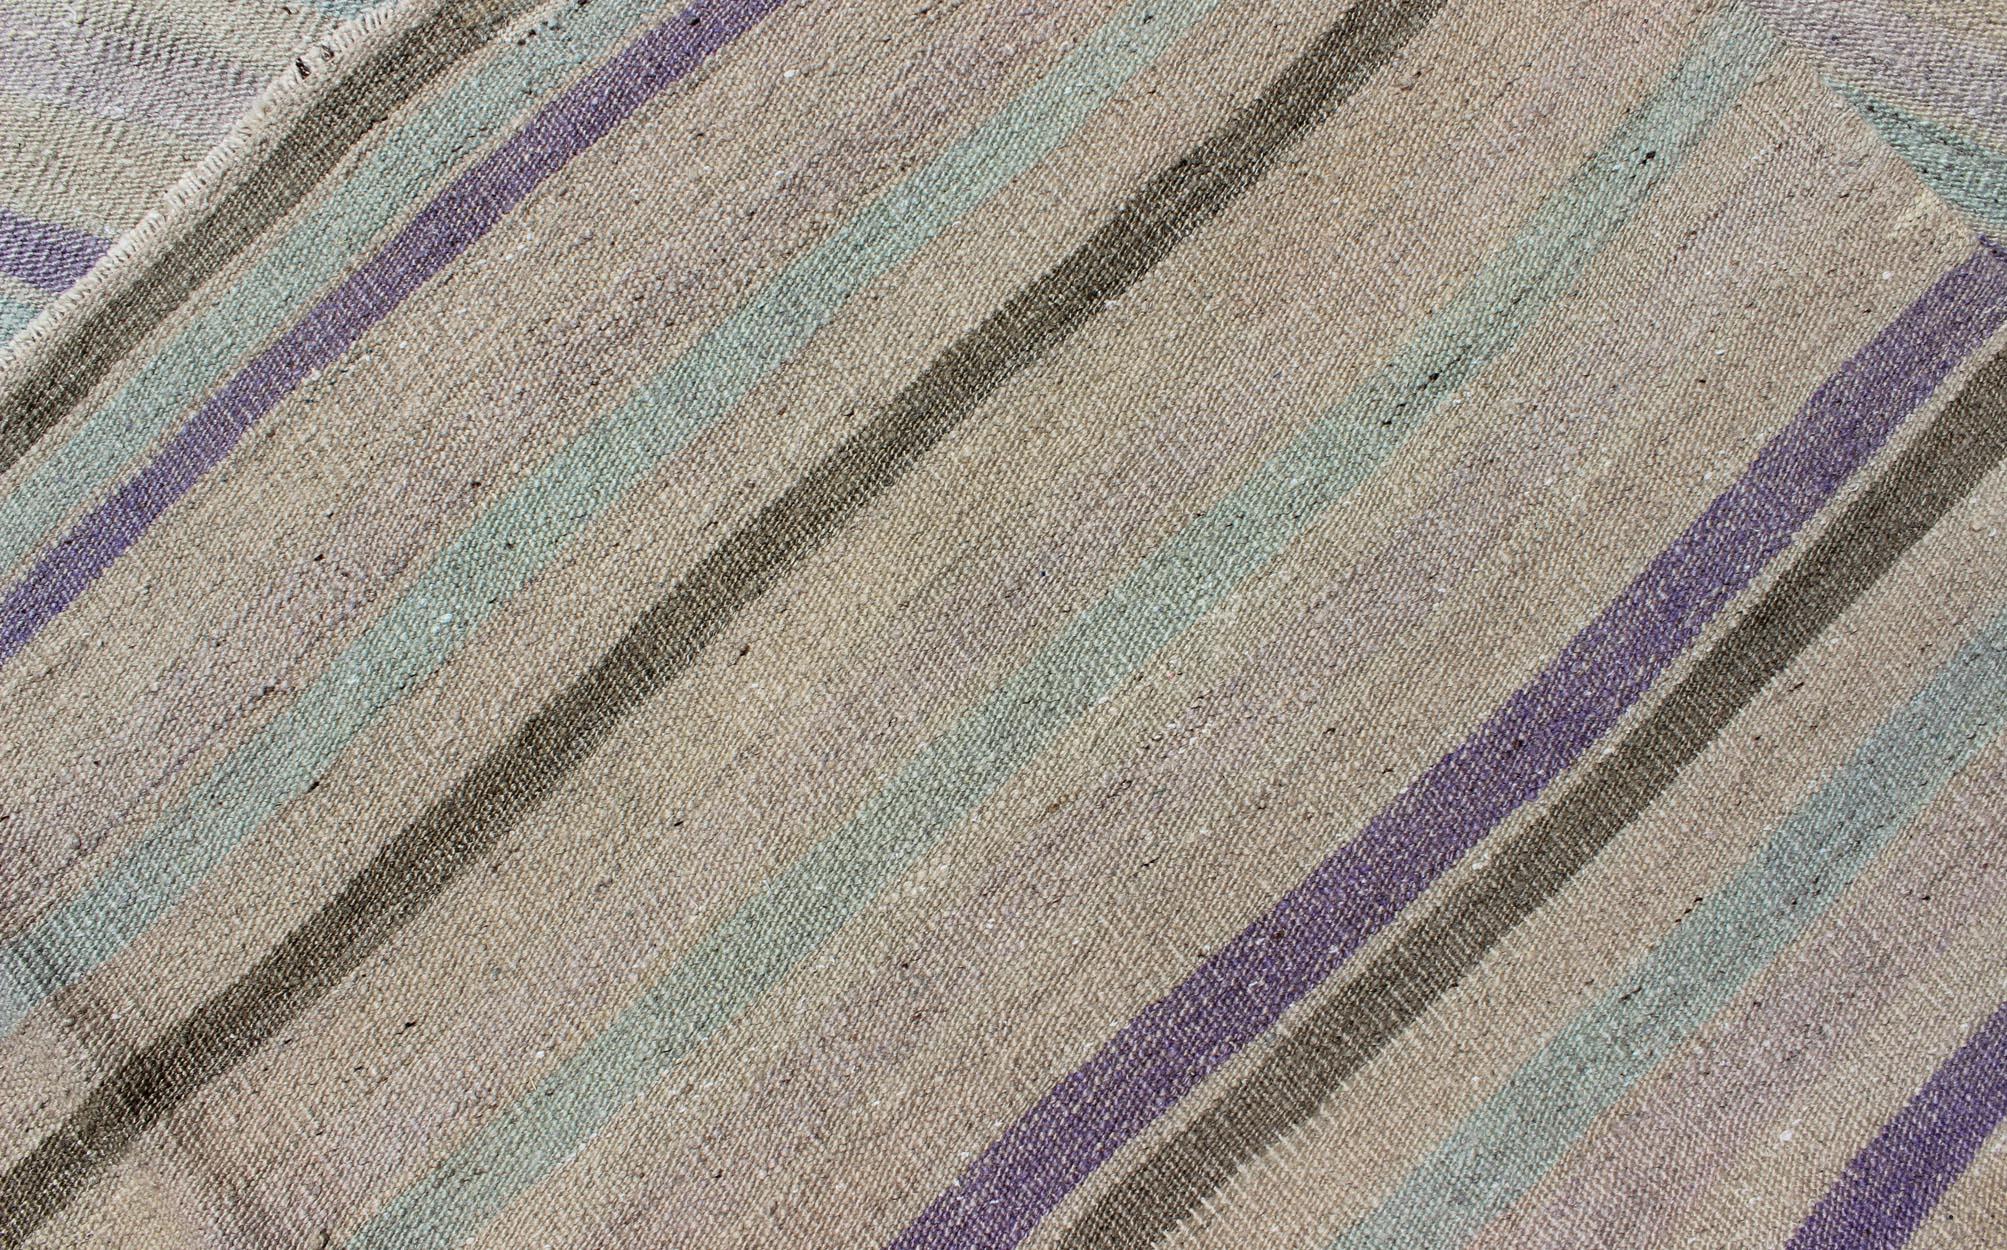 Vintage Turkish Kilim with Stripes in Light Teal, Pastel Purple, Cream and Taupe For Sale 1